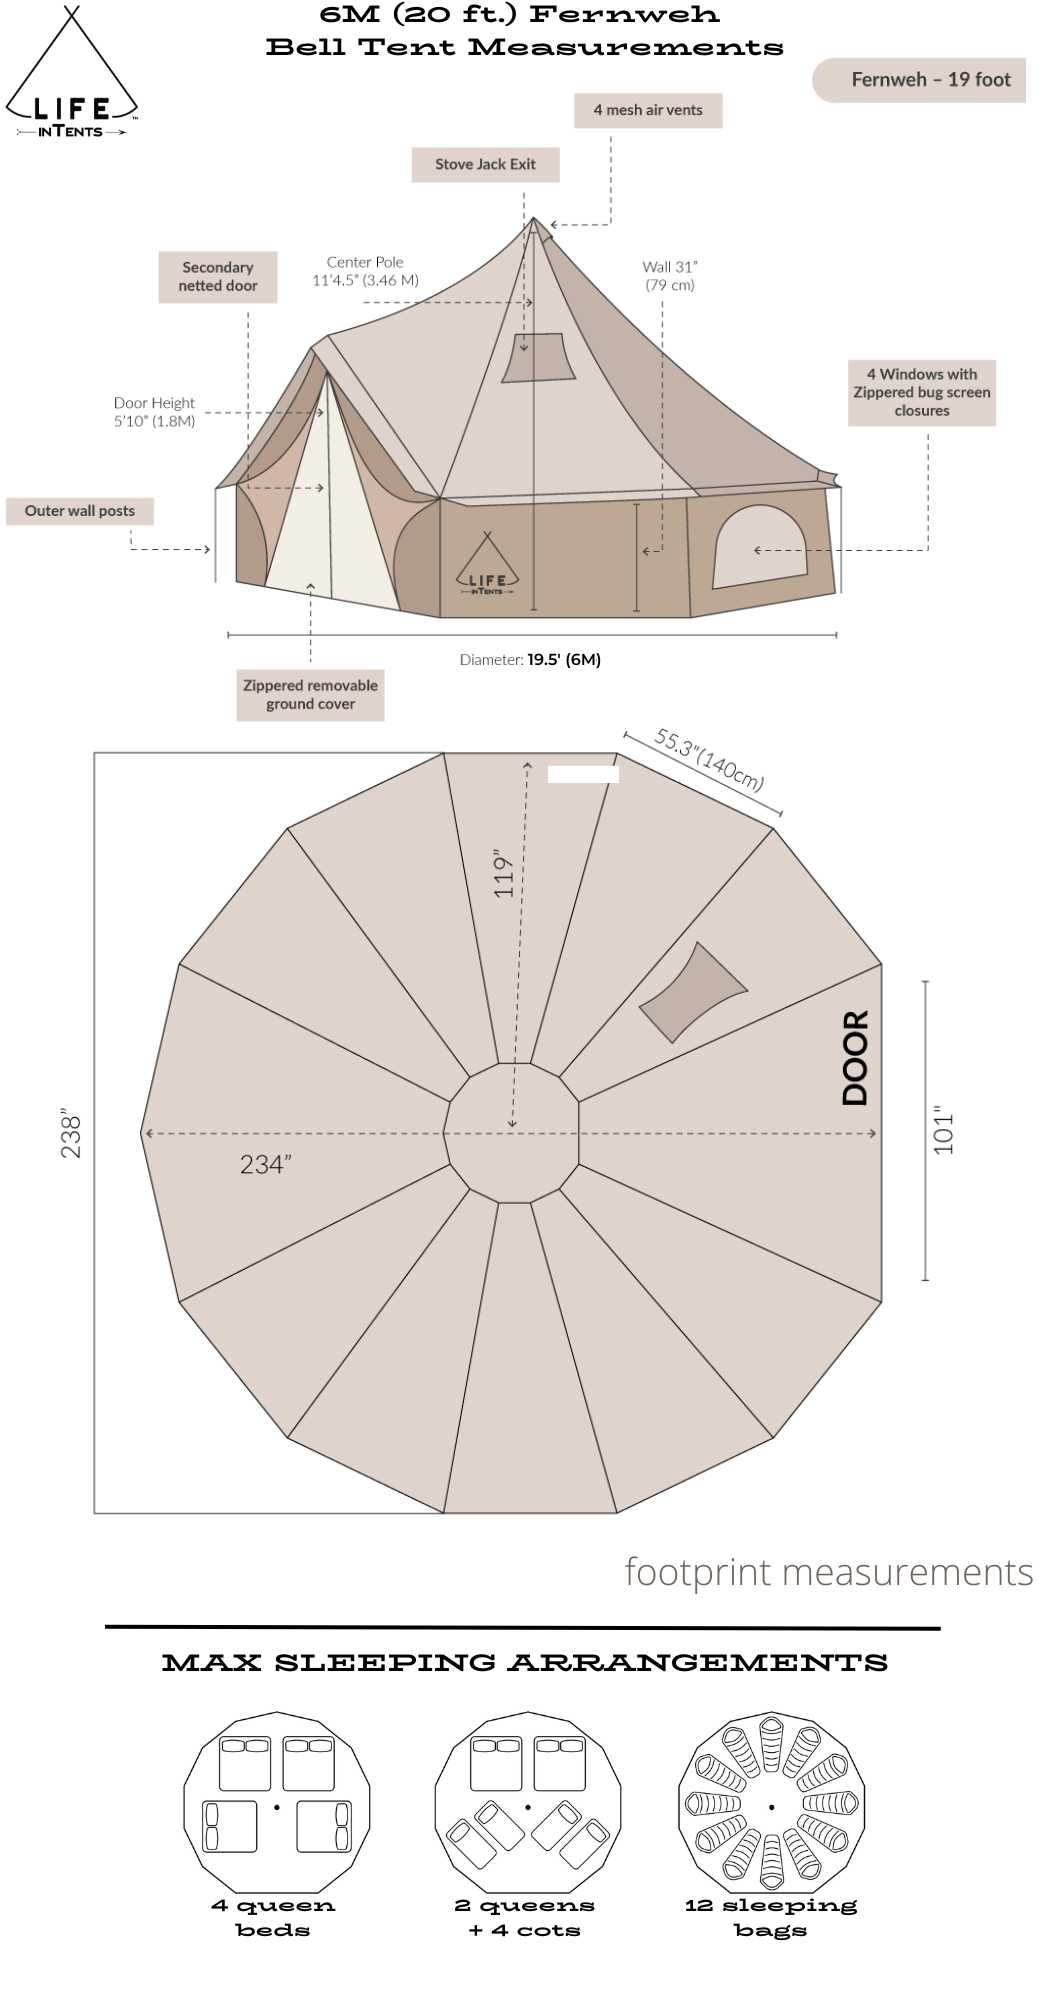 6M bell tent specs for Fernweh